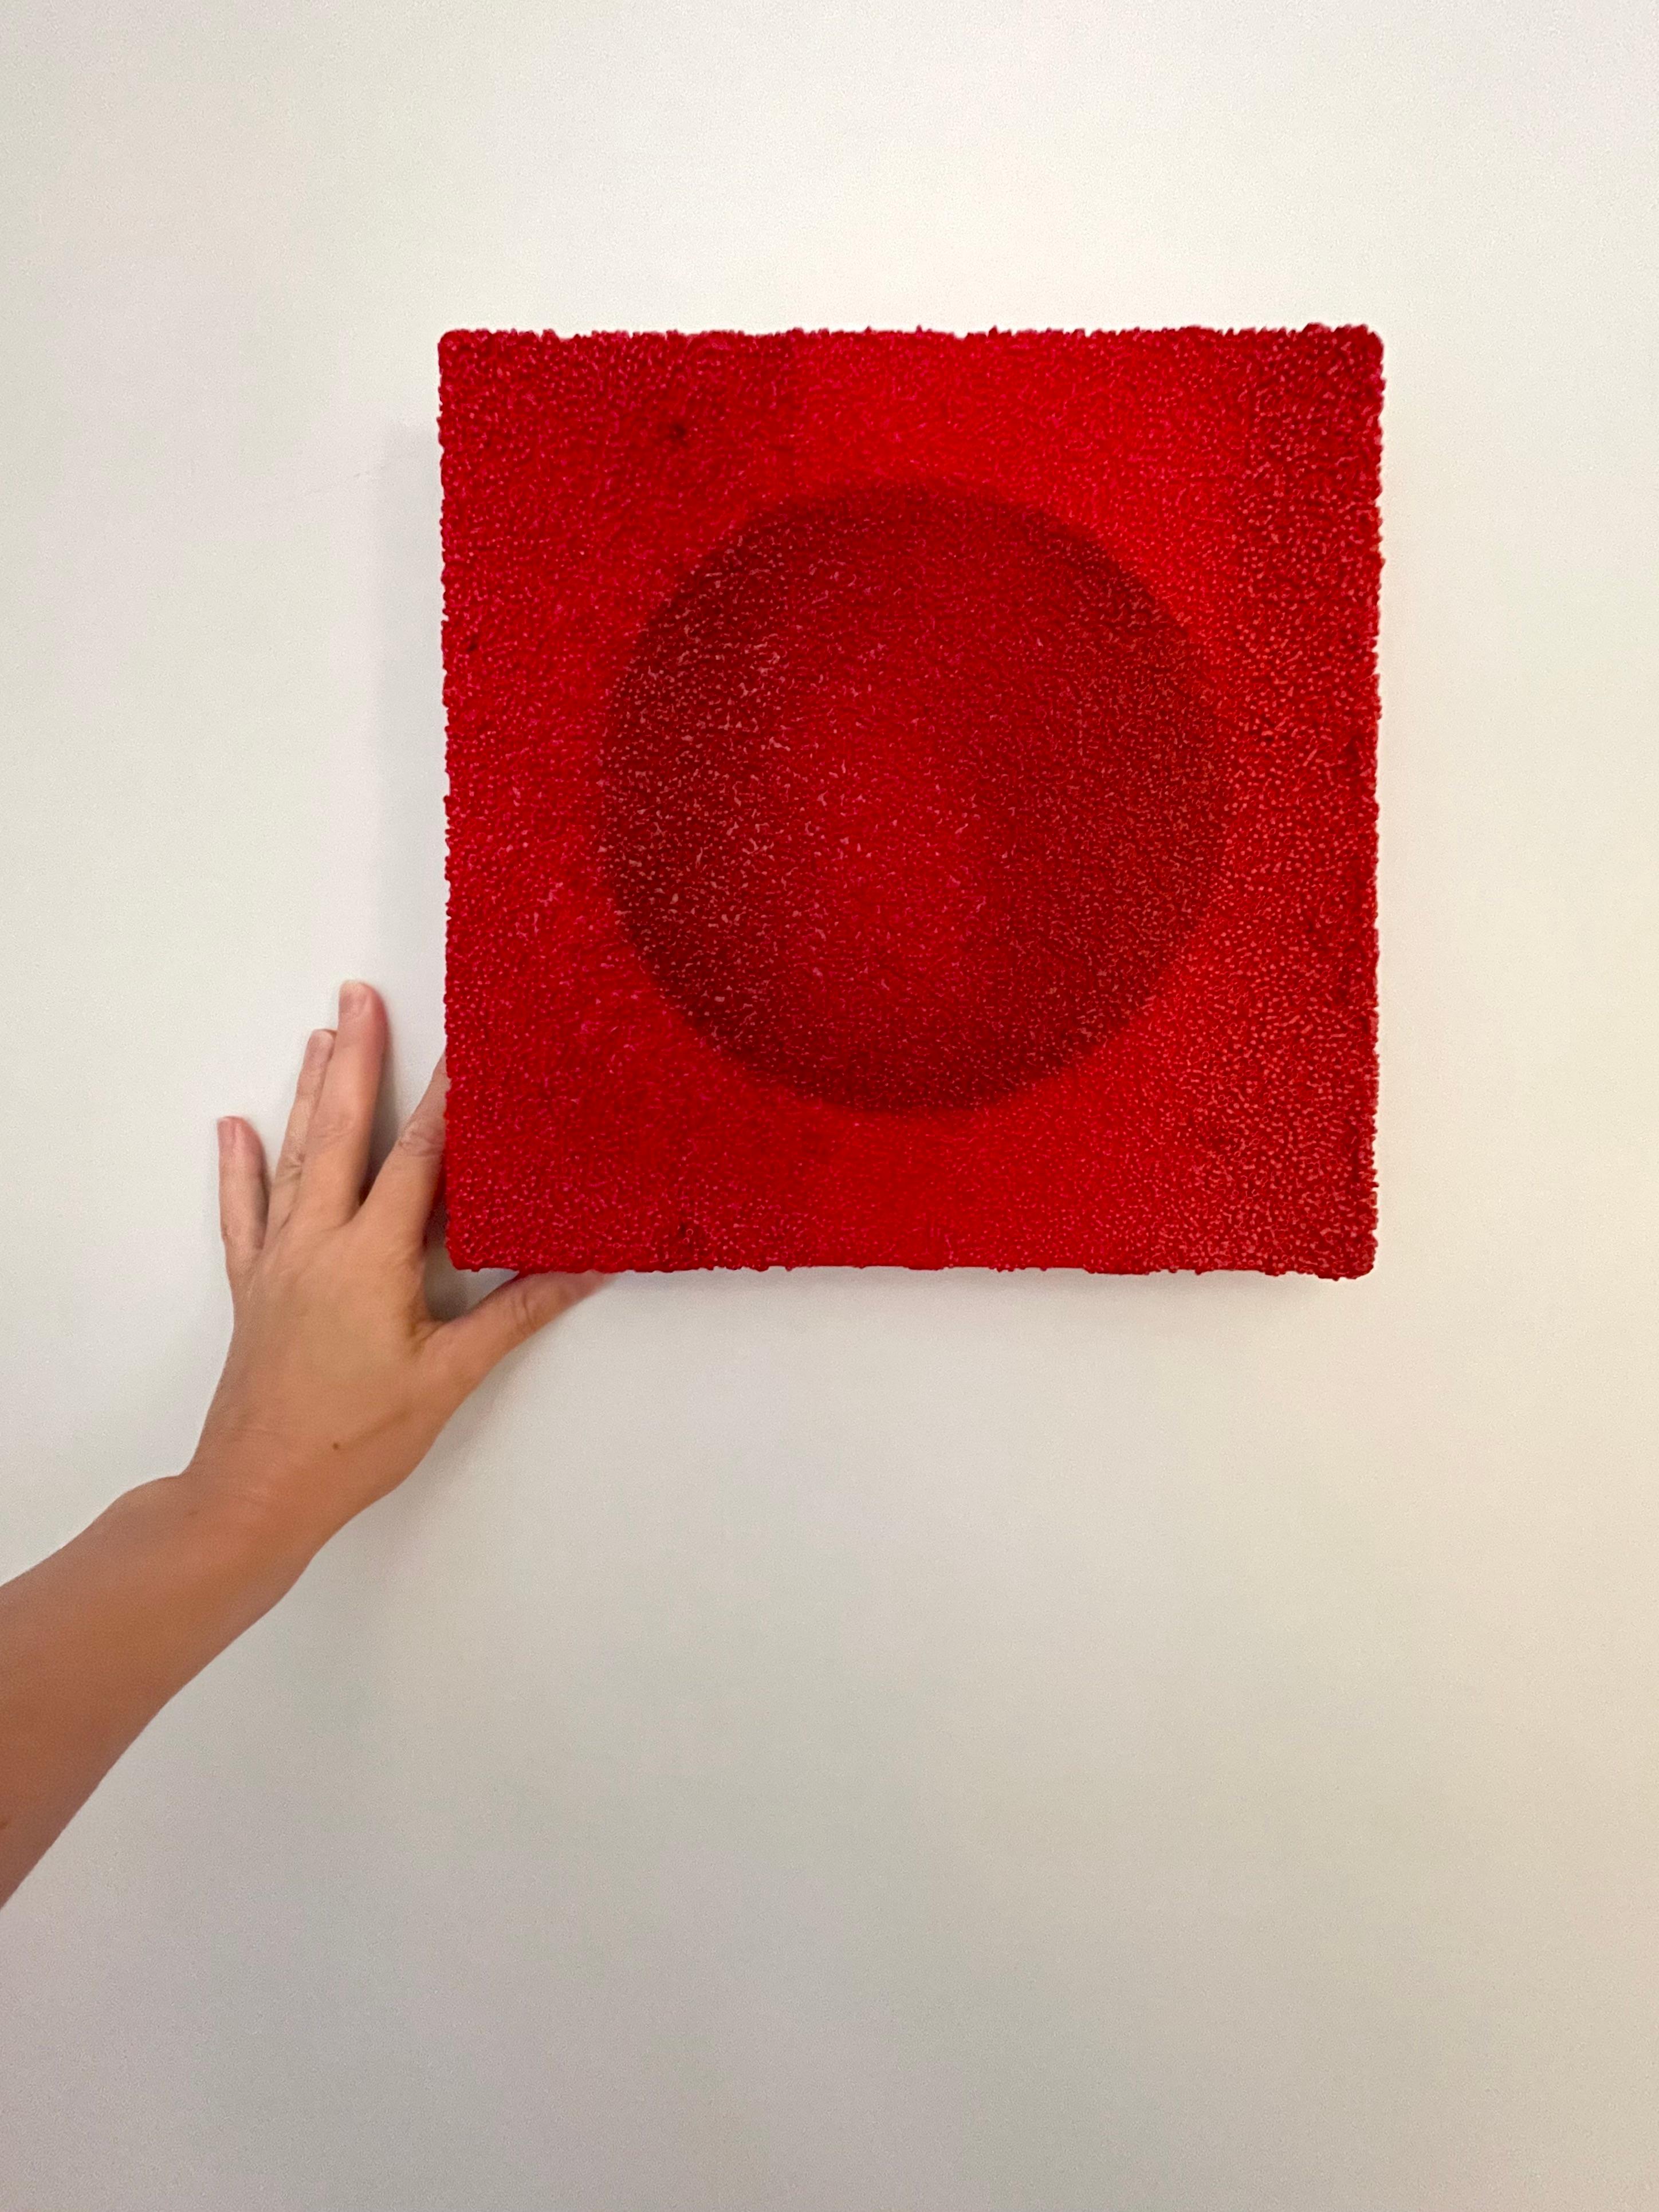 Tantra 45: minimalist abstract Pop Art mandala sculpture painting, red circles - Red Abstract Sculpture by Antonio Puri